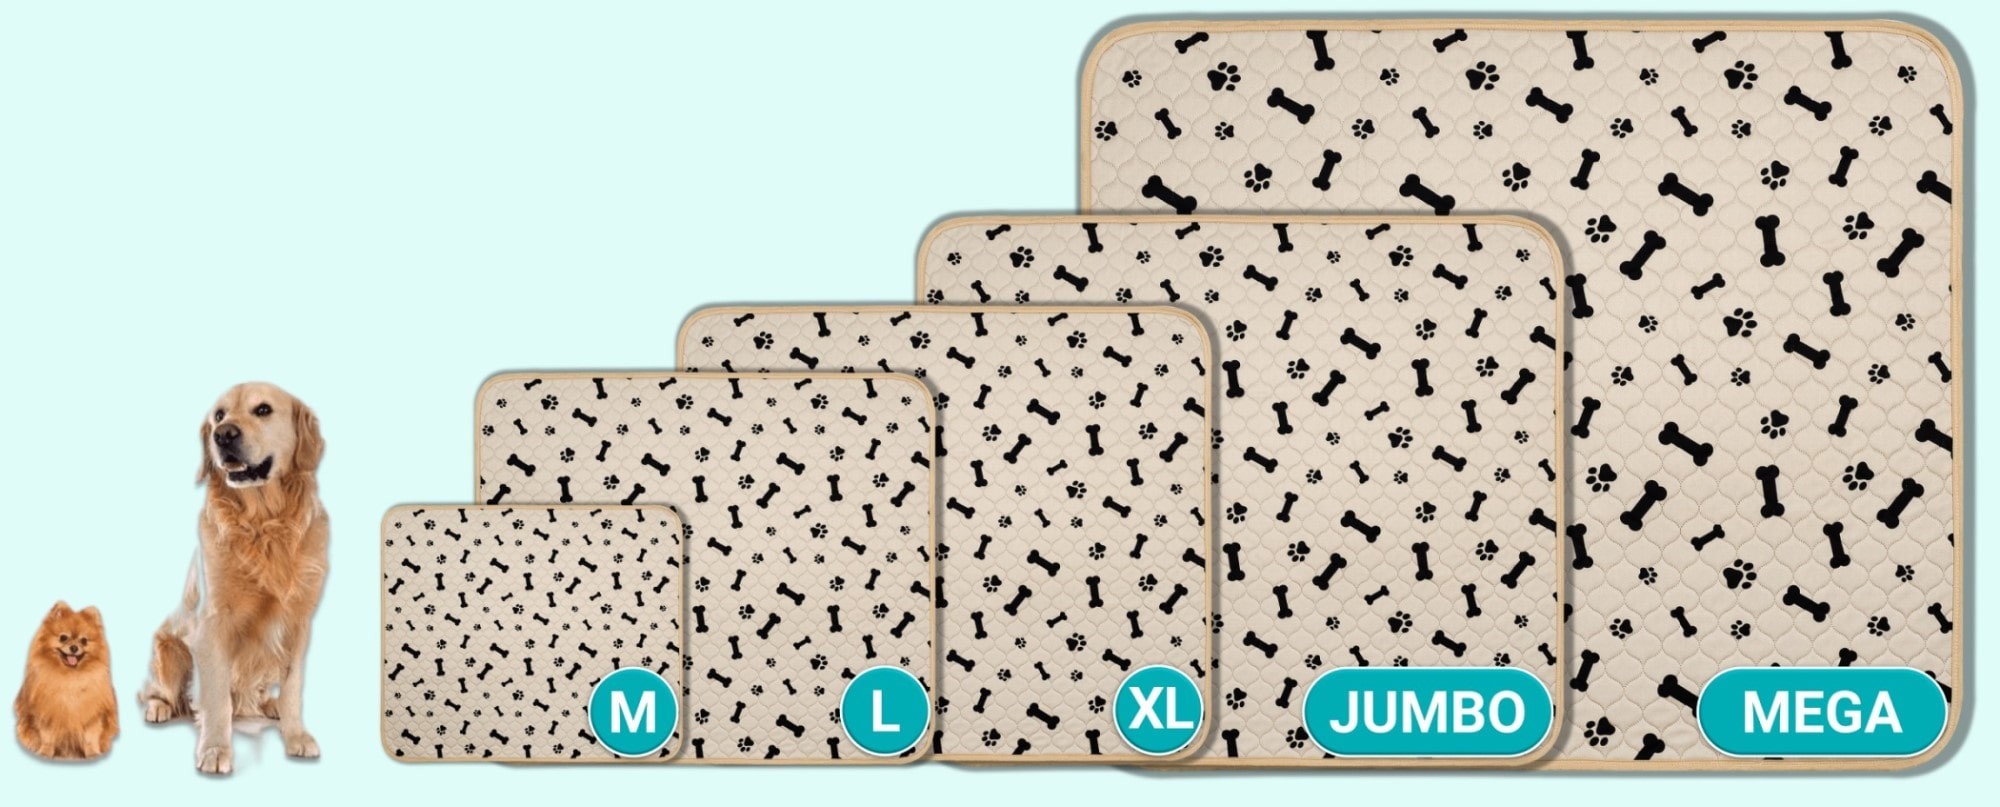 A diagram showing the various size options of the Potty Buddy reusable potty pad